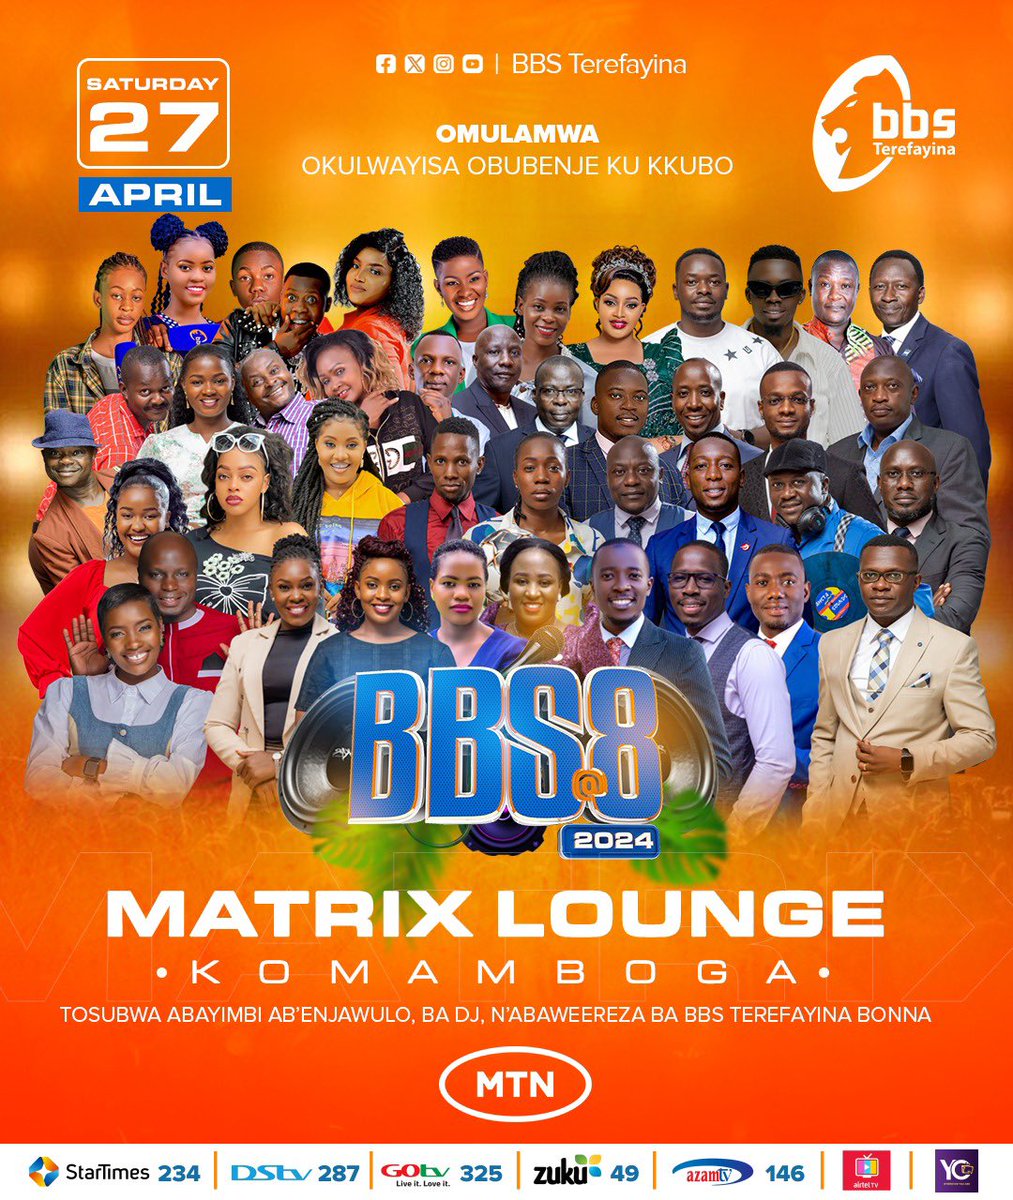 Looking for that memorable weekend experience, Komamboga is the place to be. Let’s catch up tomorrow at Matrix Lounge powered by @mtnug #BBSAt8 #TogetherWeAreUnstoppable